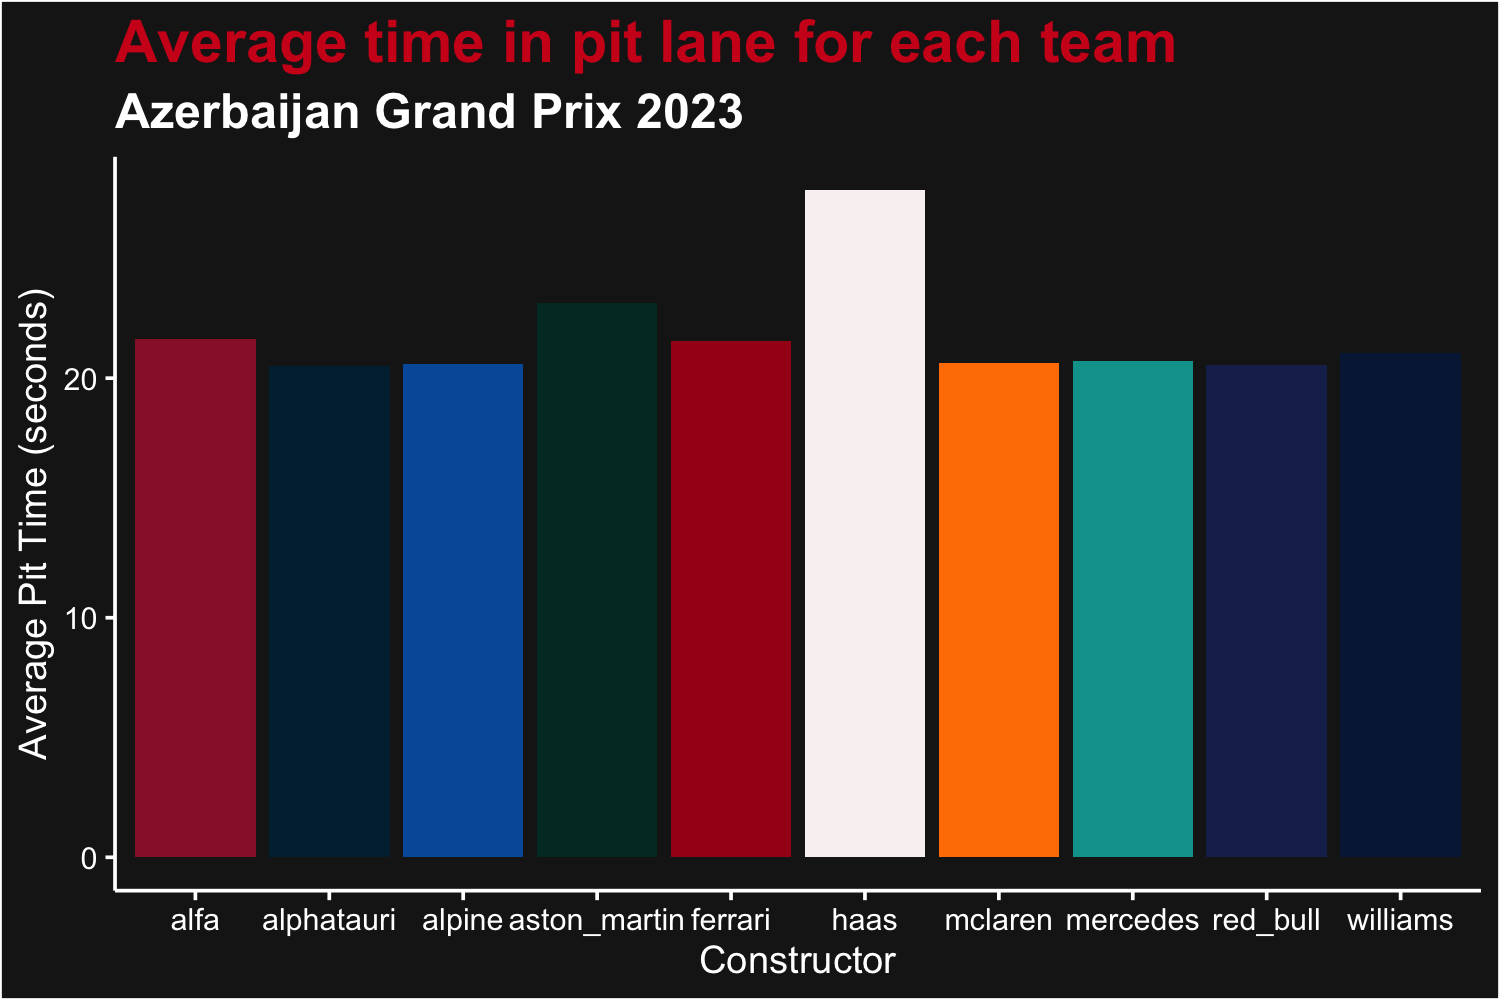 Average time in pits for each team at the 2023 Azerbaijan Grand Prix